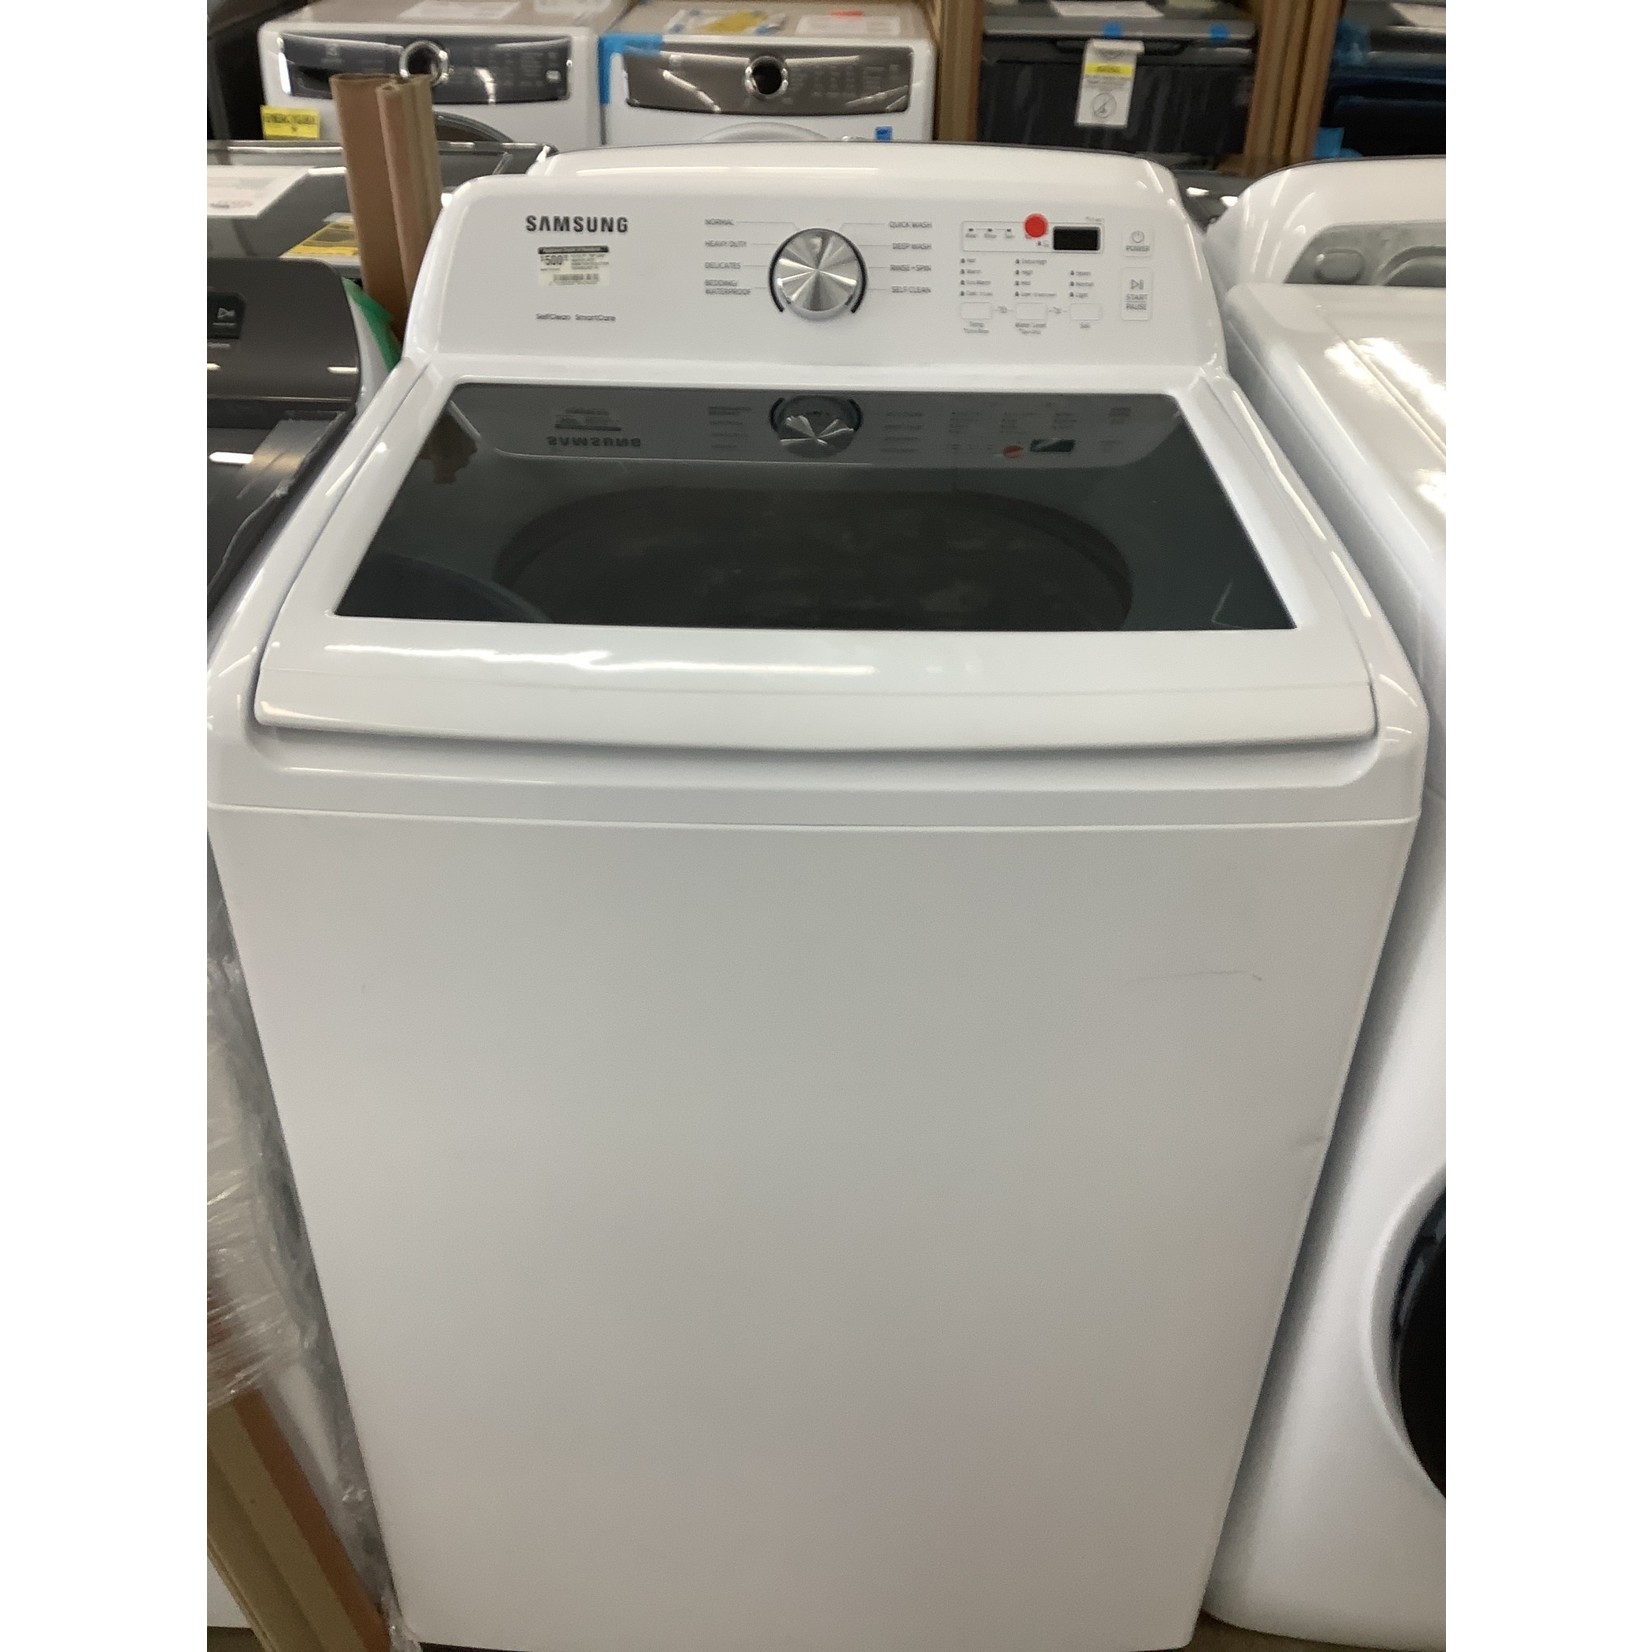 Samsung 4.5 CU.FT. TOP LOAD WASHER WITH VIBRATION REDUCTION TECHNOLOGY IN WHITE